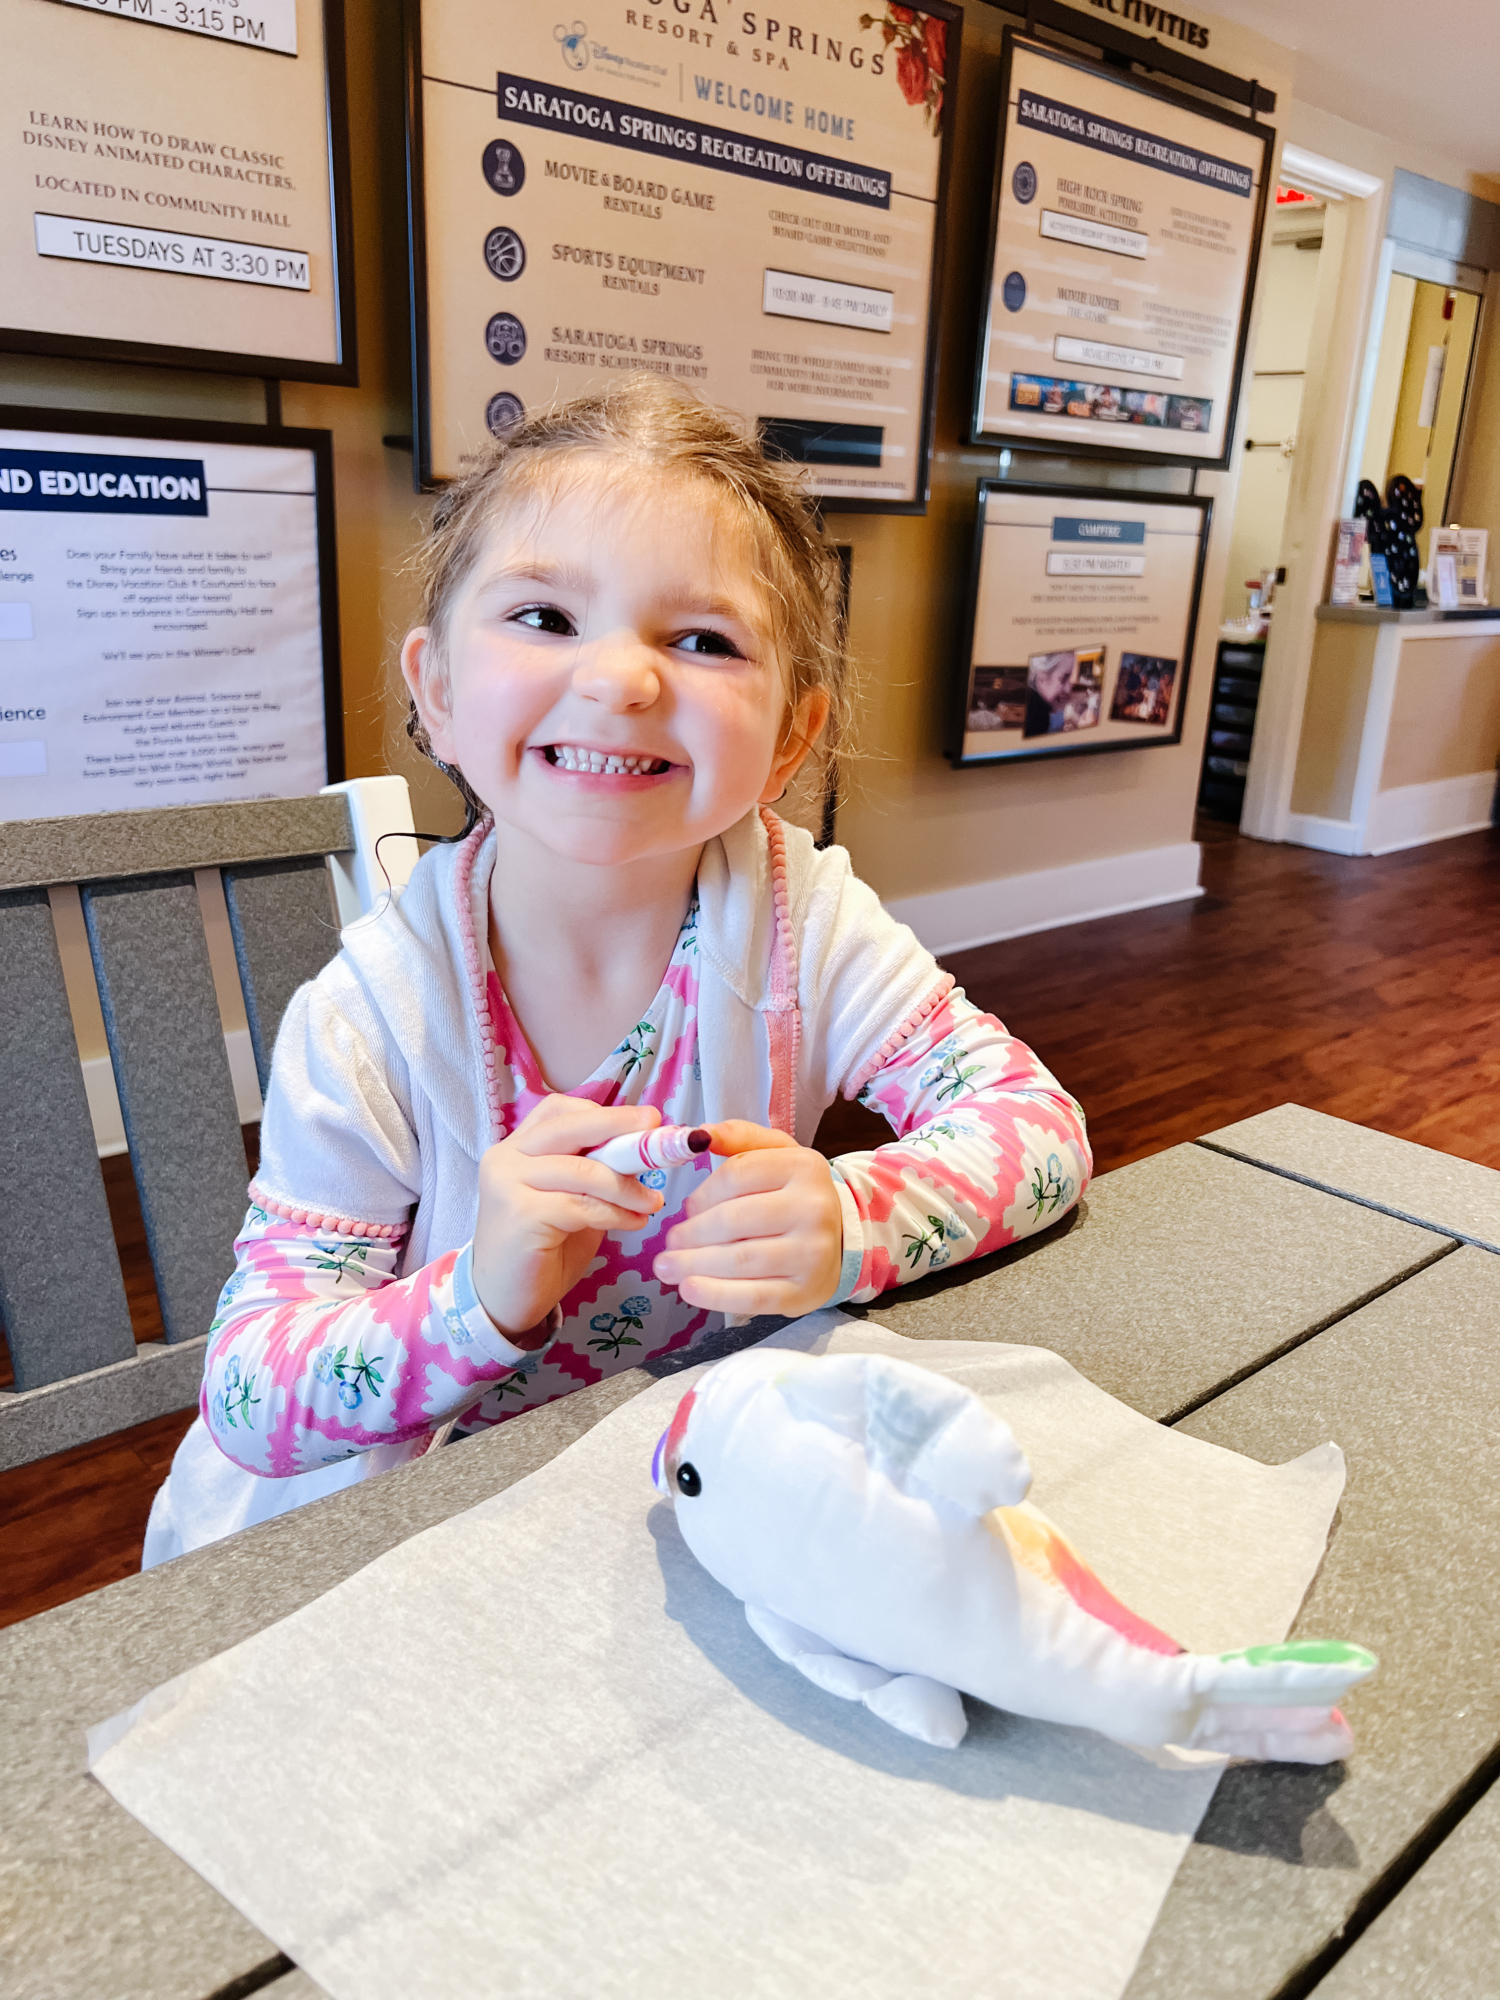 Eleanor coloring a plush animal at the community hall at Disney's Saratoga Springs Resort.